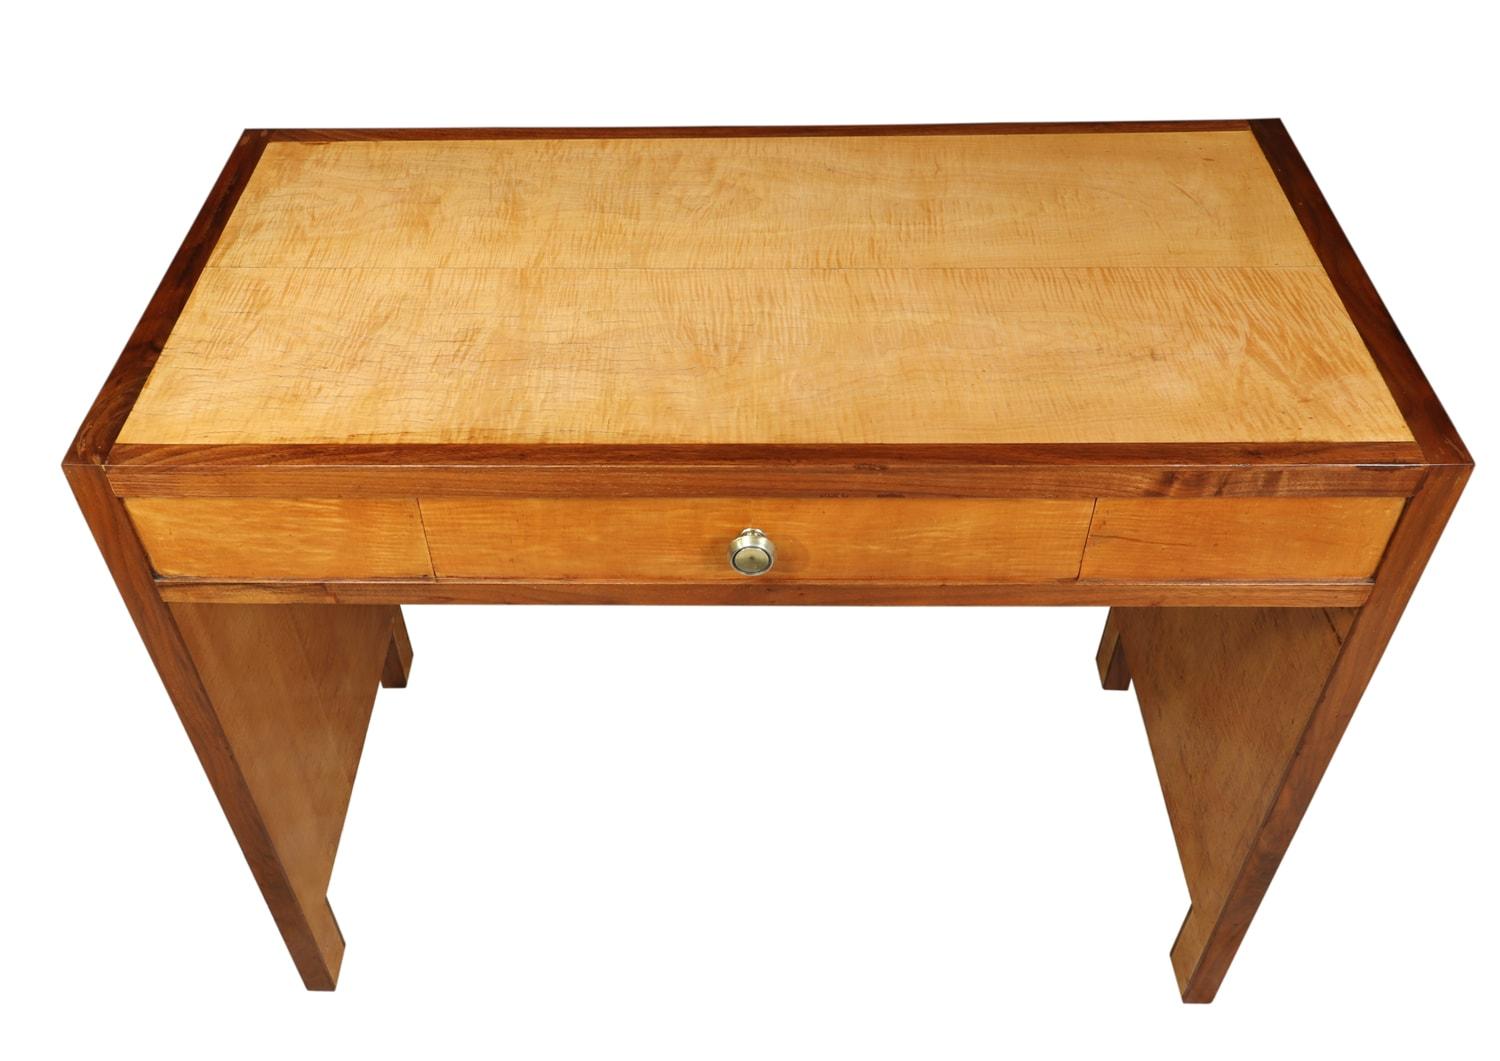 Art Deco Sycamore writing table, circa 1930
a single drawer writing table produced in France in the 1920s with solid walnut edging and sycamore veneer the table is aesthetically pleasing to the eye, the drawer is of dovetail joint construction with